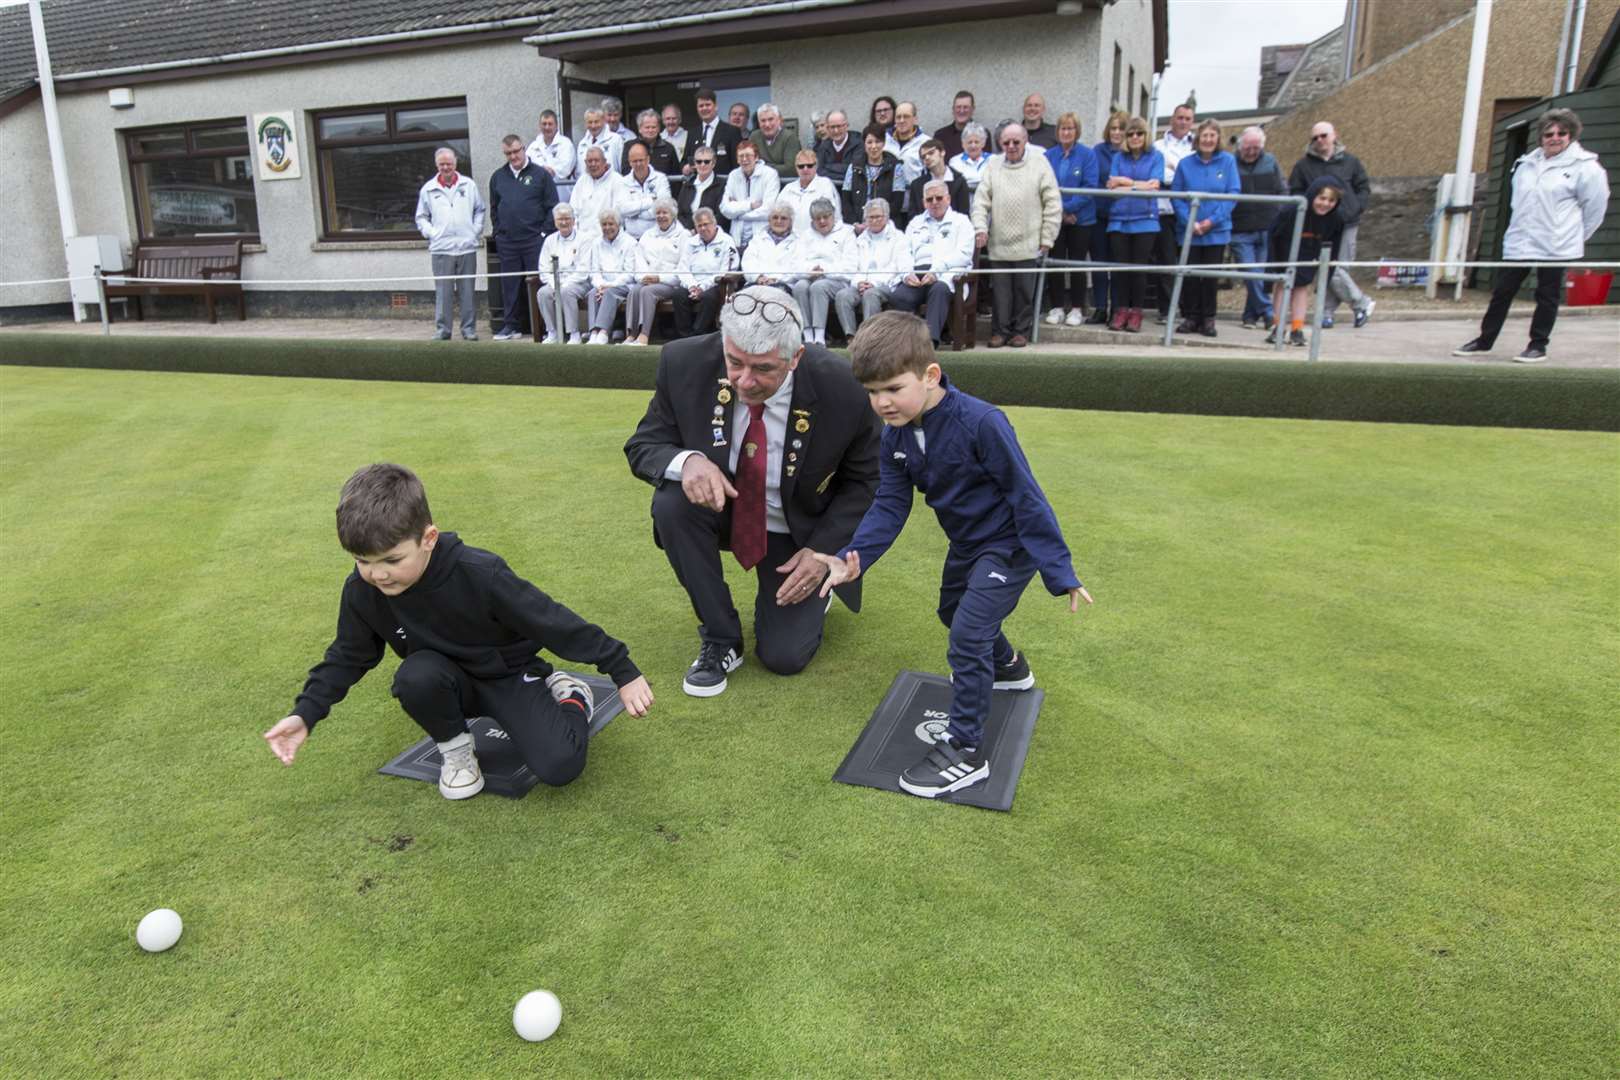 St Fergus president Malky Mackay watches as his two grandsons – seven-year-old Harry Heaton (left) and three-year-old Calum – throw the first jacks of the season. Looking on are some of the other members of the club along with invited guests. Picture: Robert MacDonald / Northern Studios